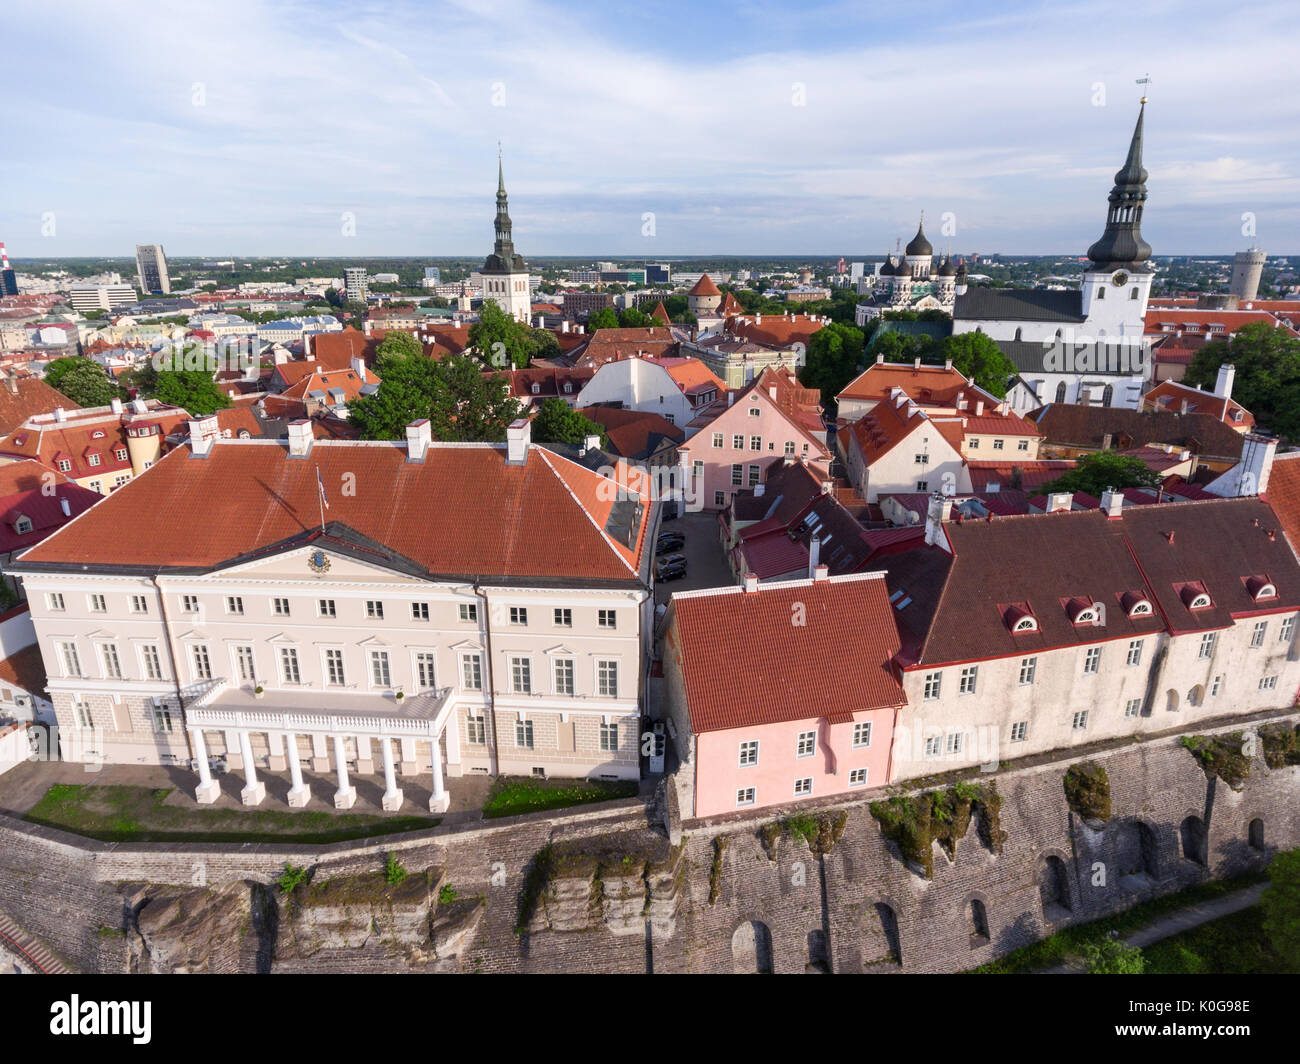 Building of government of Estonia and Church of St. Nicholas on background. The Old Town of Tallinn. Aerial view. Estonia, Europe Stock Photo